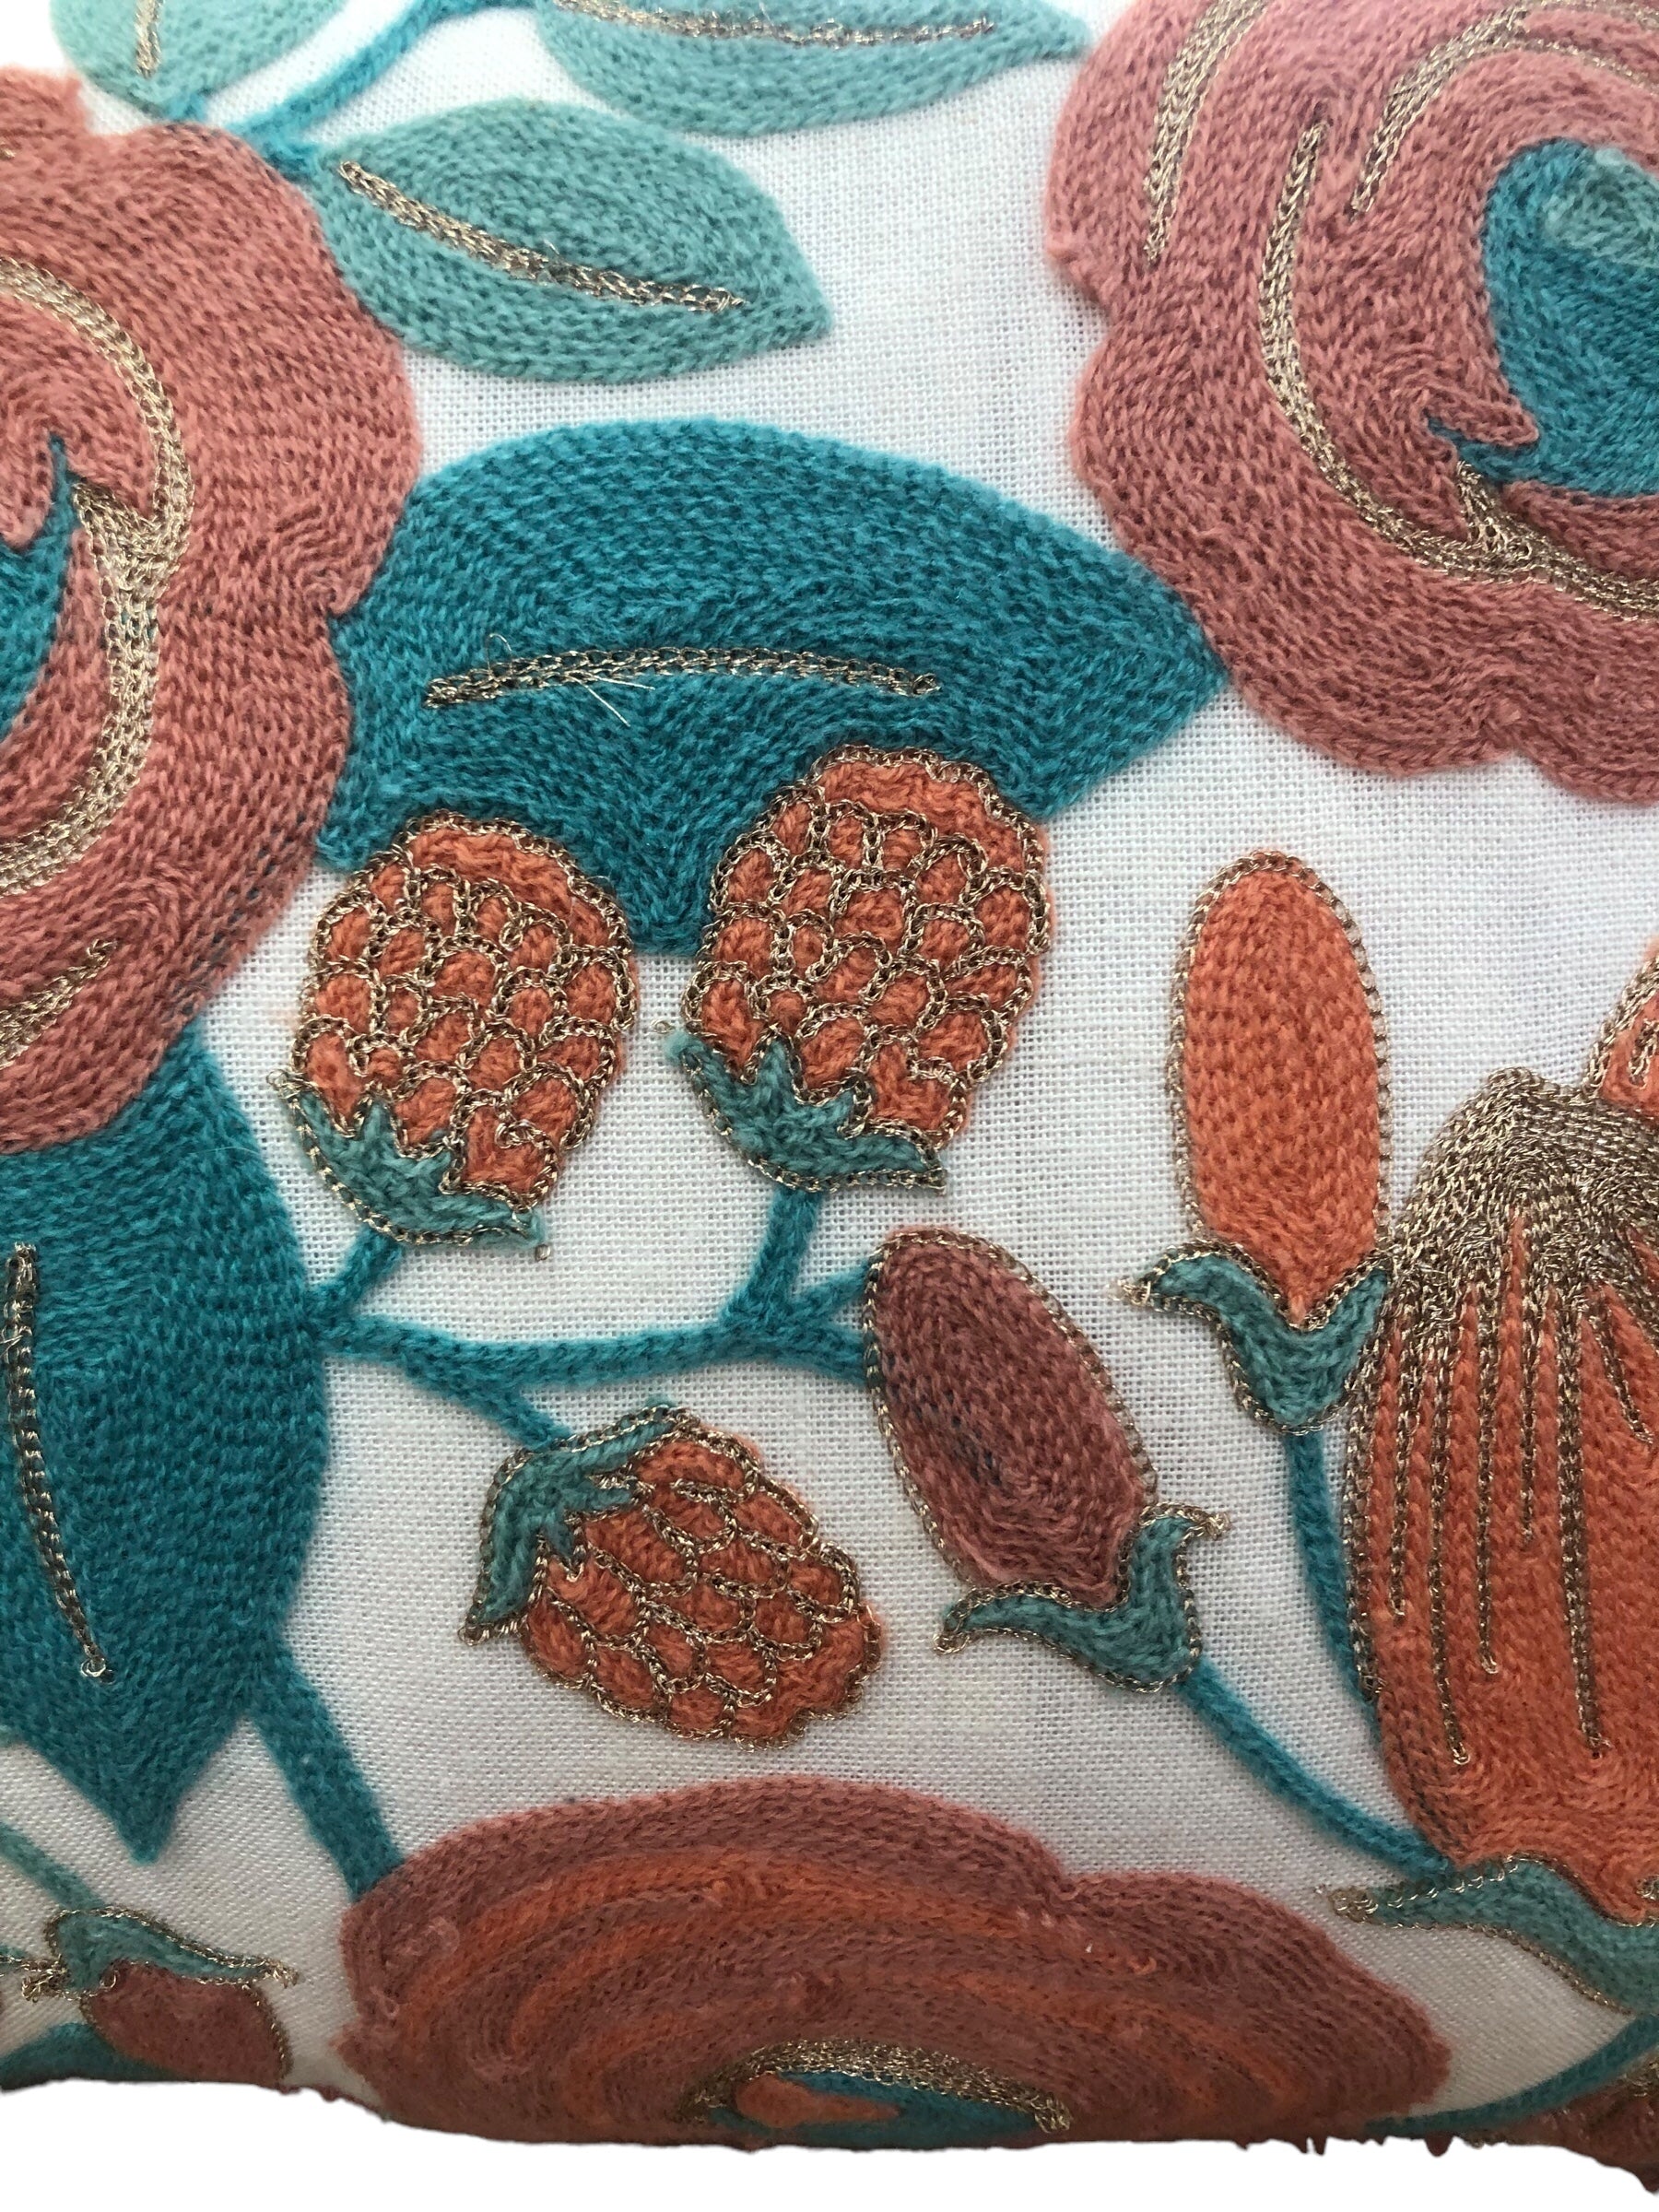 Embroidered Pillow with Orange and Blue